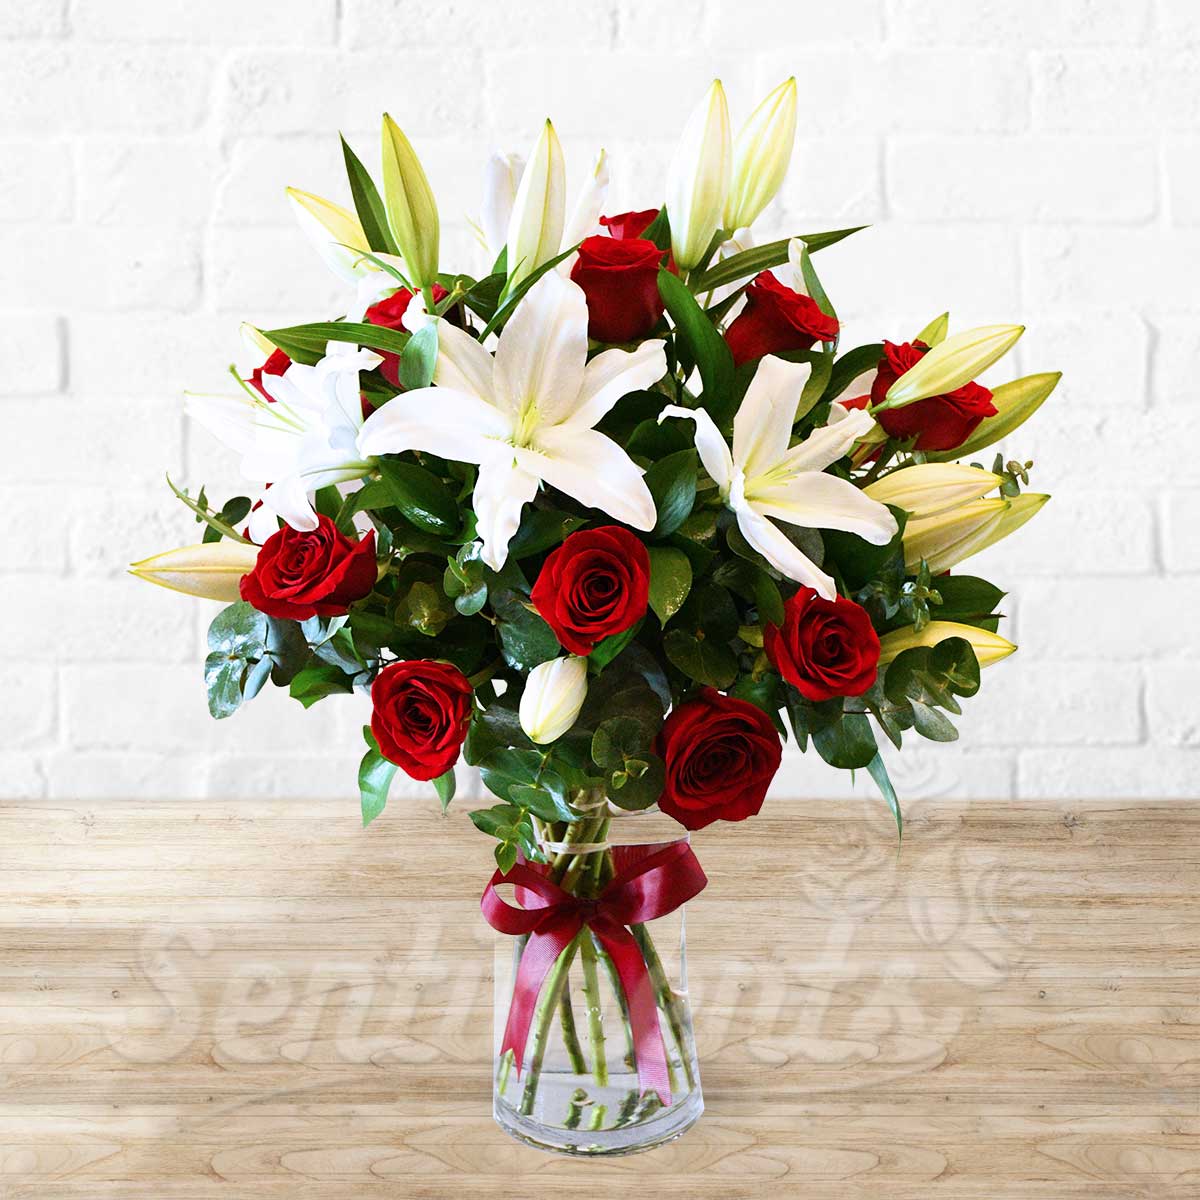 Roses and Lilies in a Vase